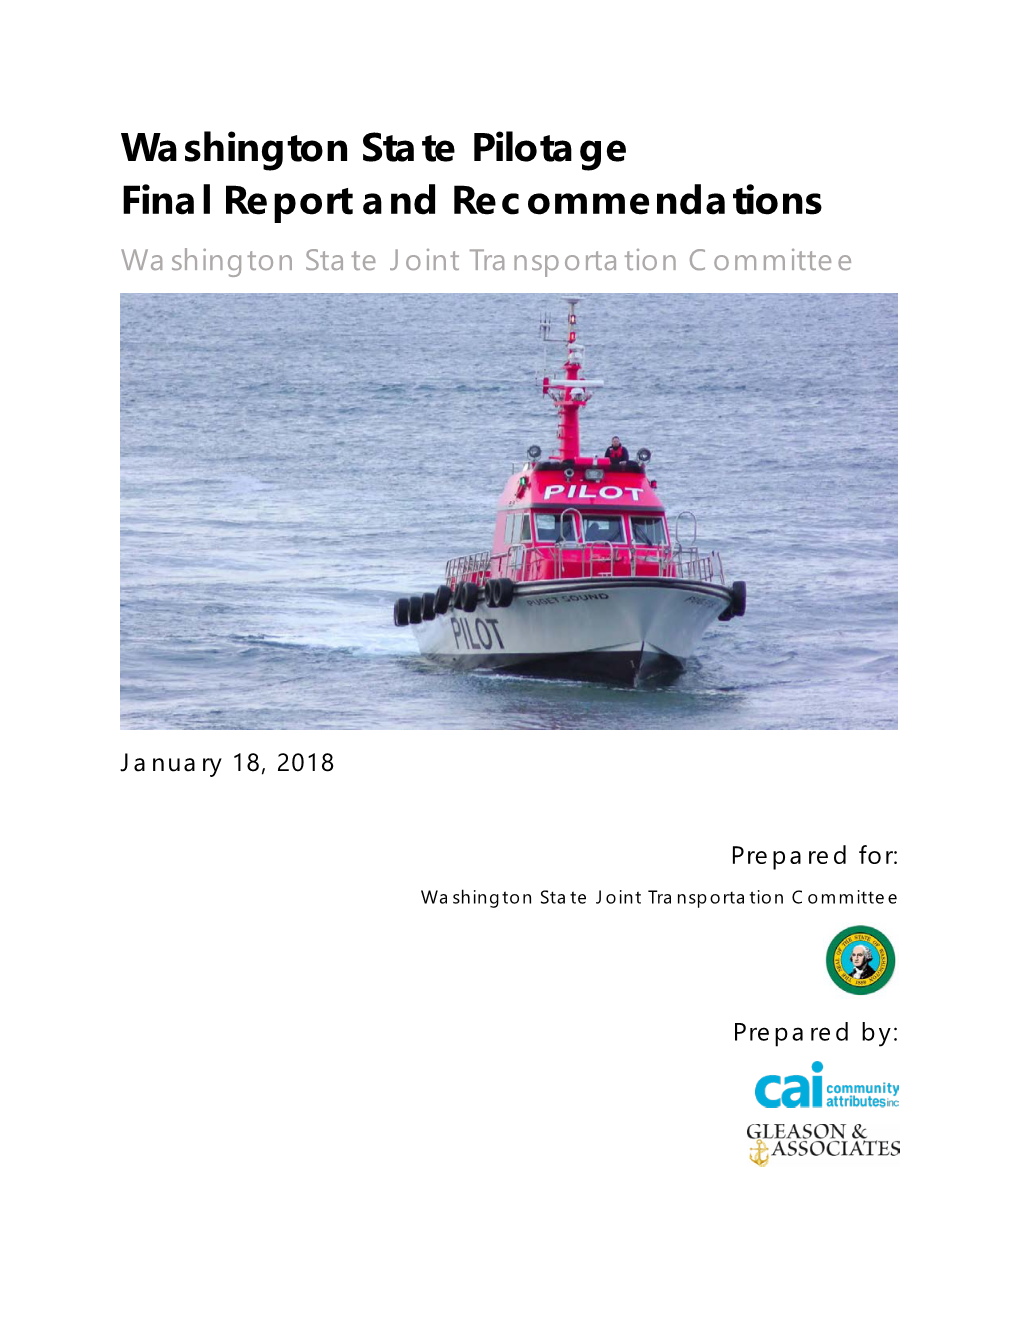 Washington State Pilotage Final Report and Recommendations Washington State Joint Transportation Committee